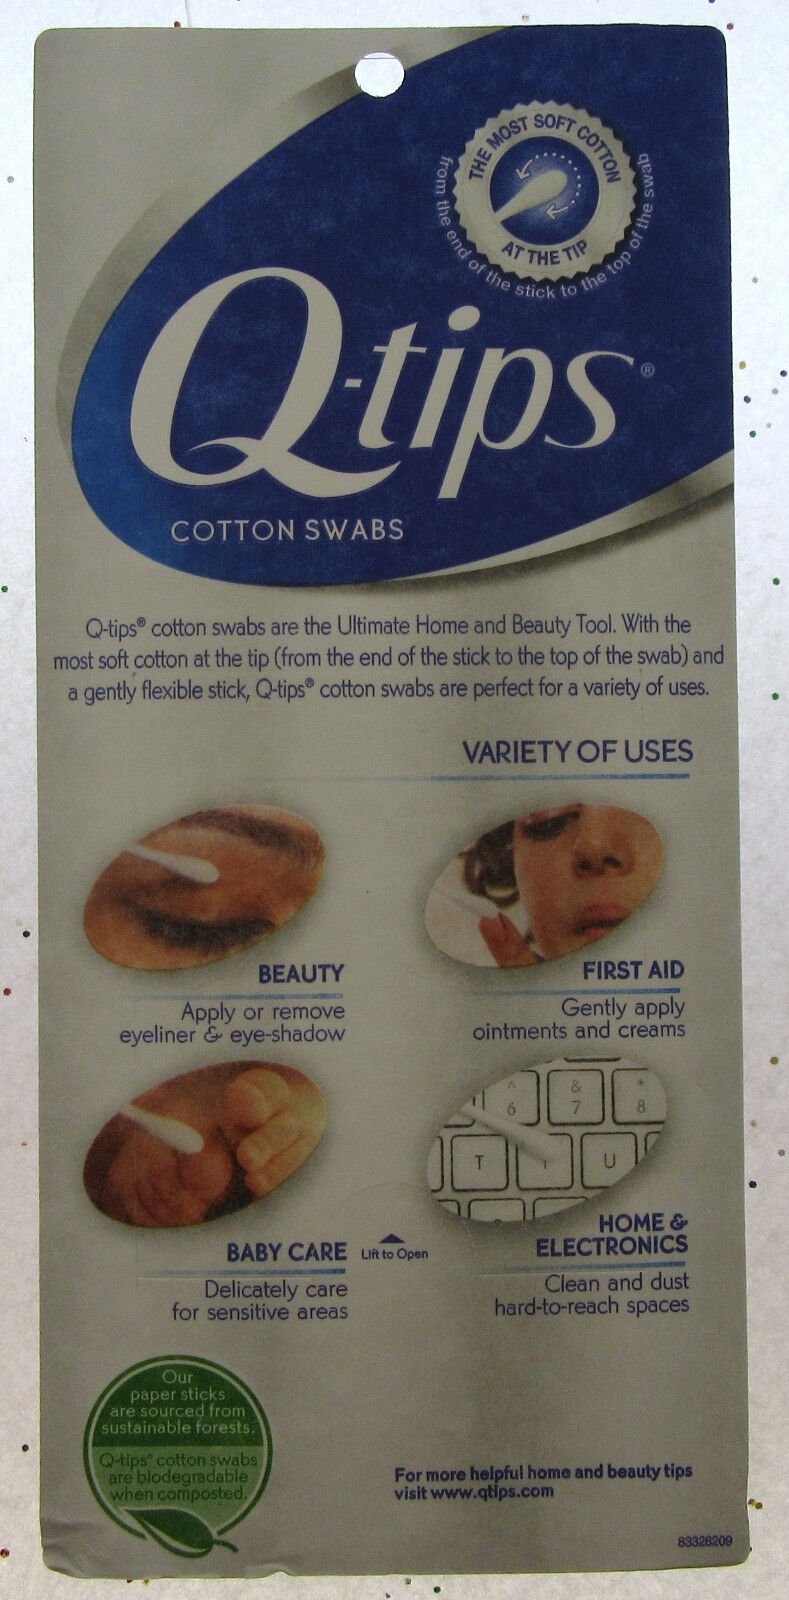 Q-tips 750 Count Cotton Swabs Brand NEW Sealed Sterile Ears